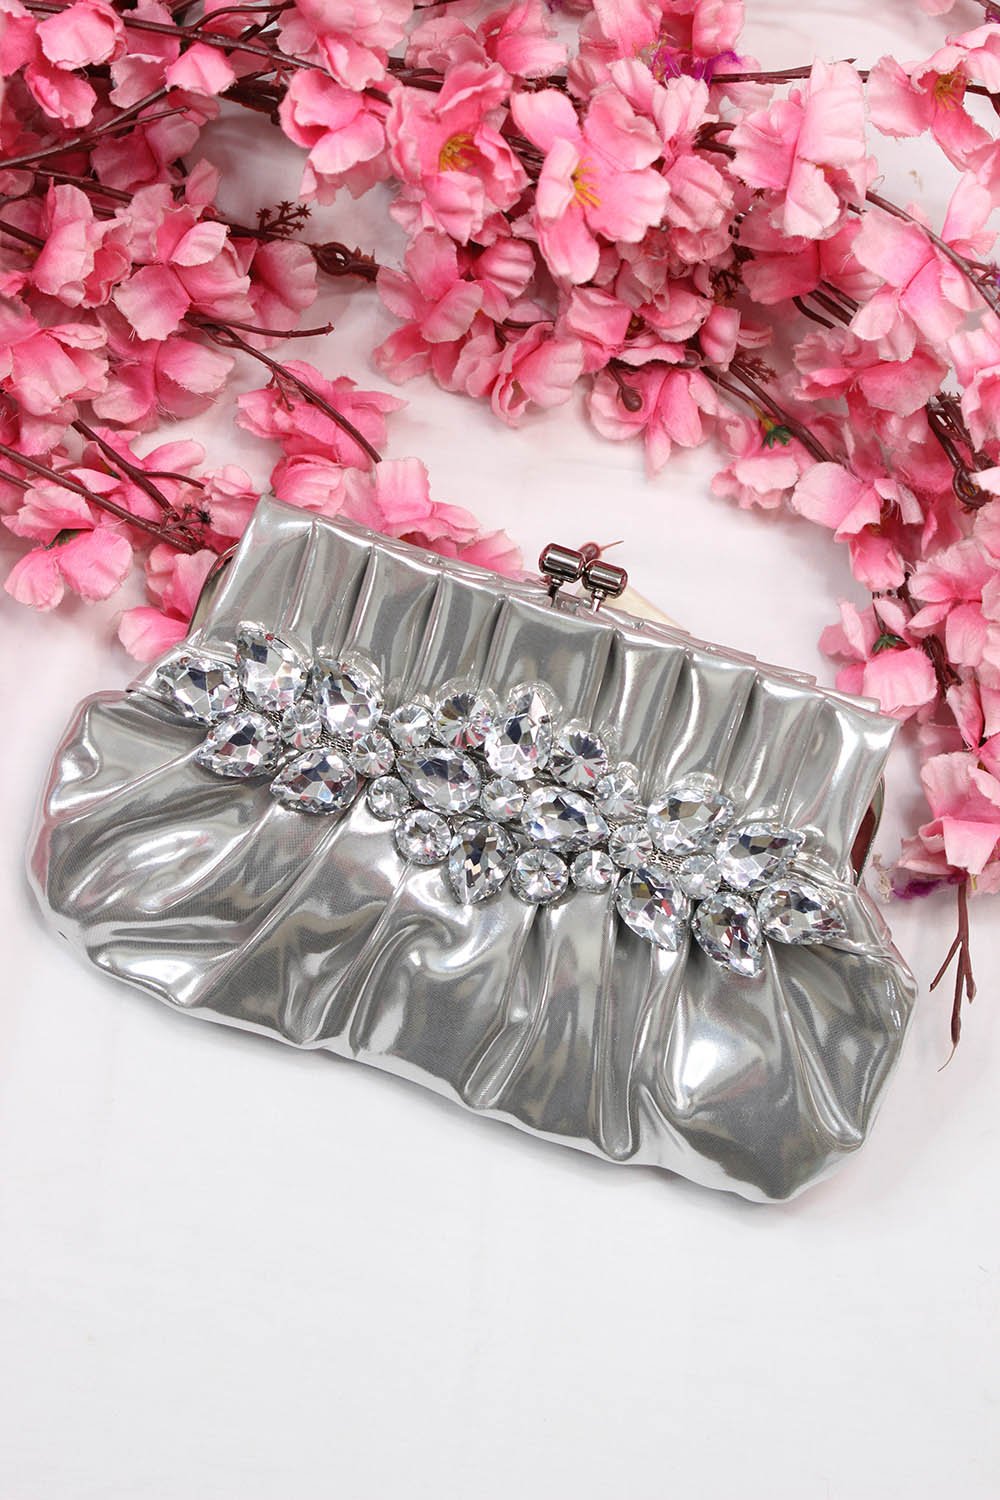 Sparkle & Shine - Make a Statement with Our Exclusive Silver Clutch Sling Bag Collection - Perfect for Any Outfit and Occasion - Luxurion World